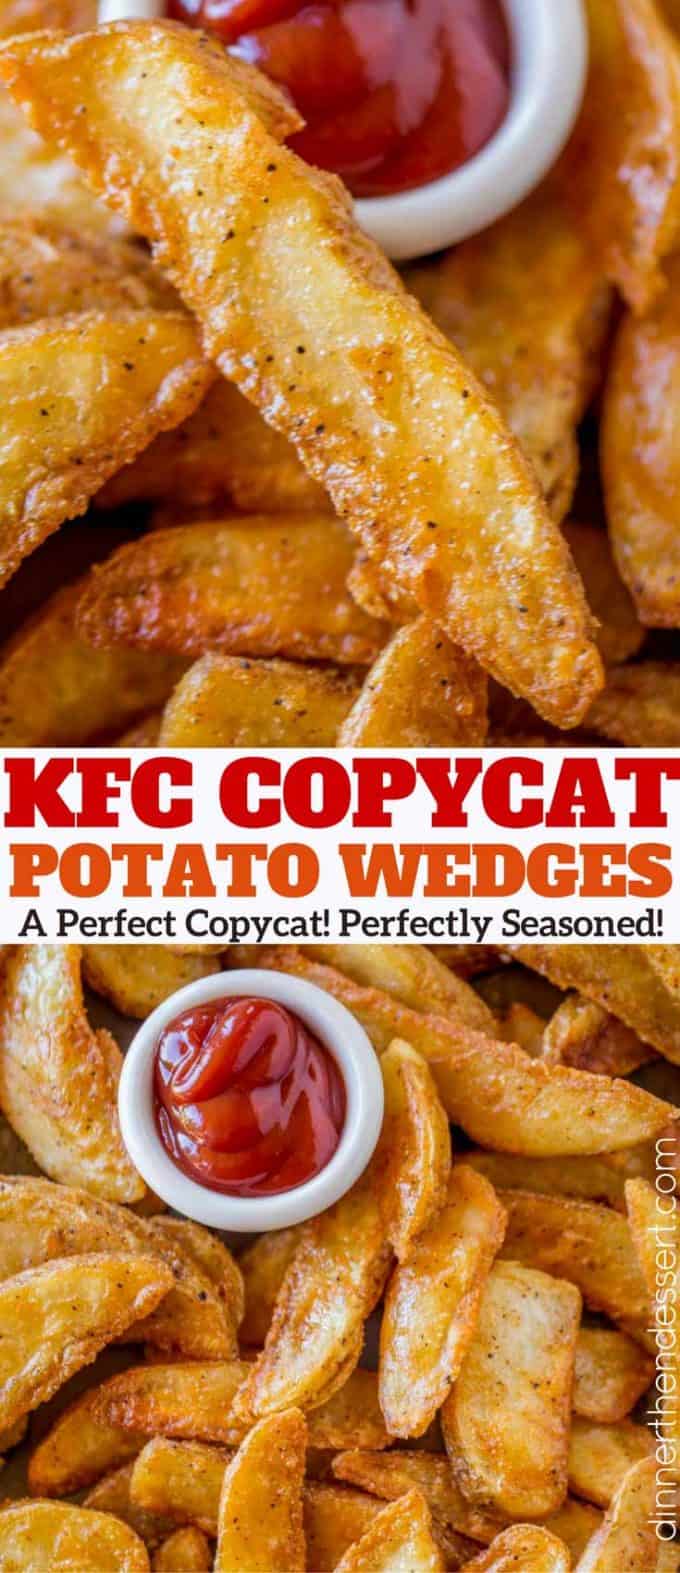 You'll LOVE these KFC Potato Wedges! They're so easy, crispy on the outside and fluffy on the inside!